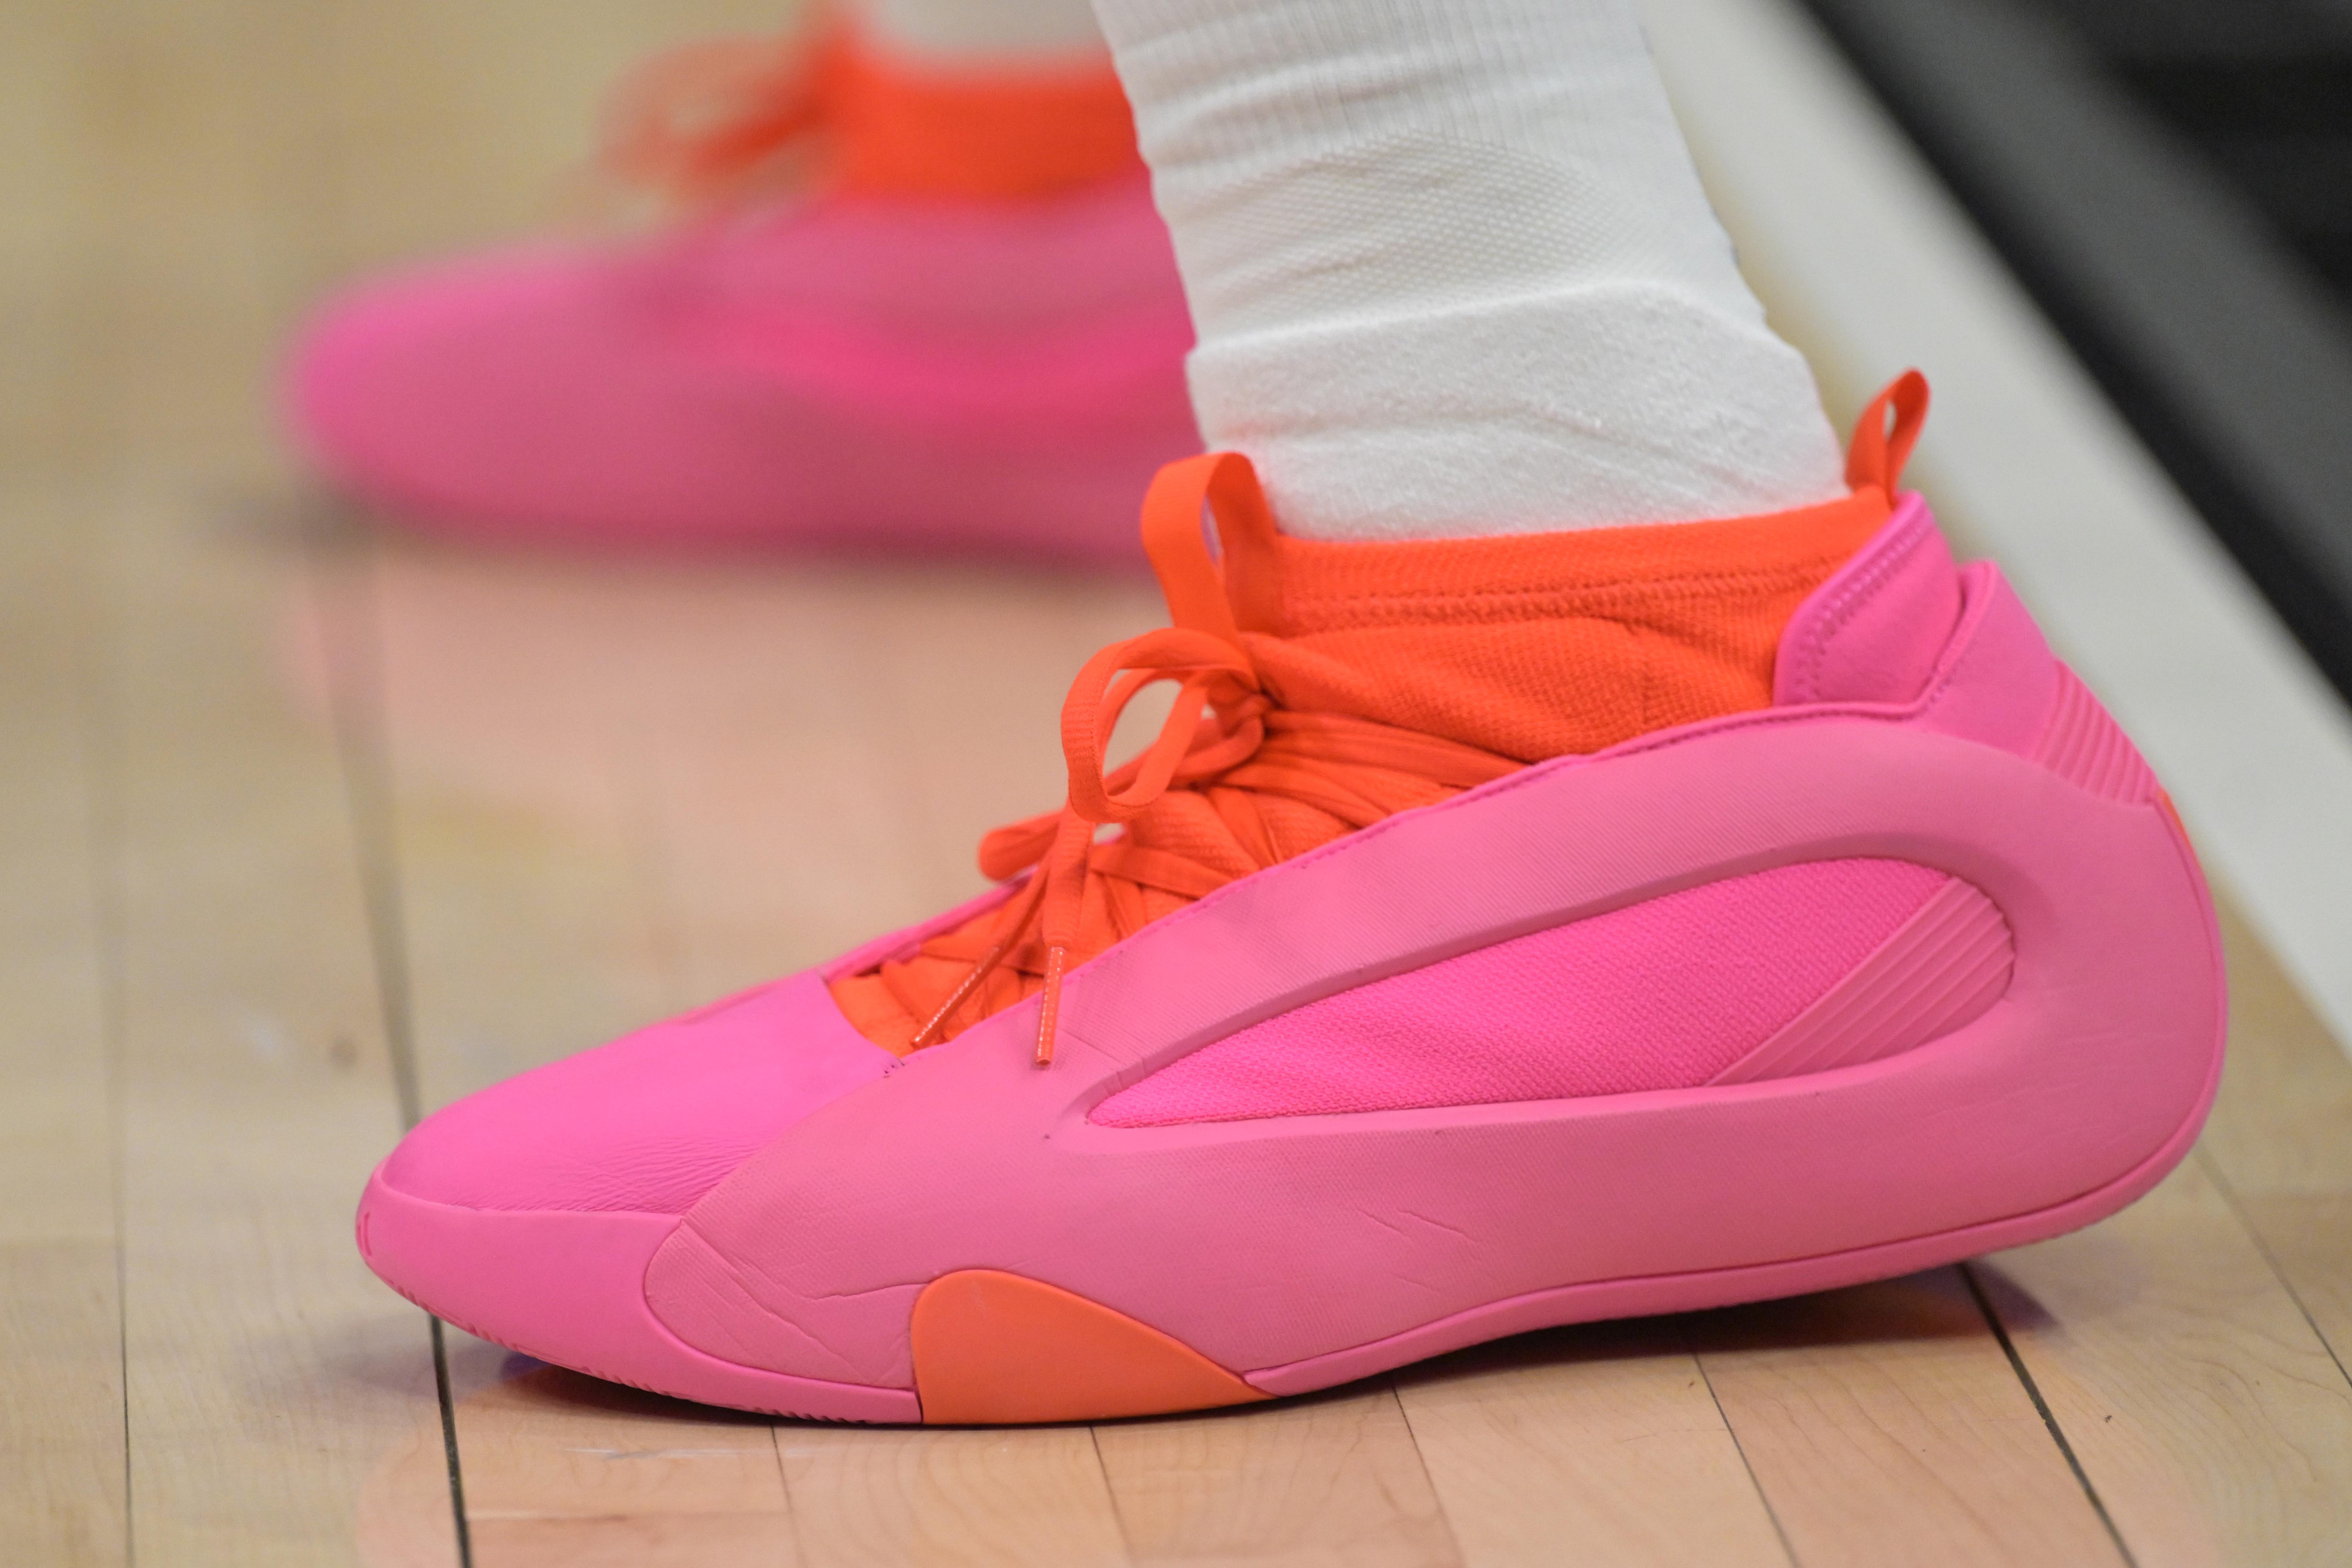 LA Clippers guard James Harden's pink and orange adidas sneakers.